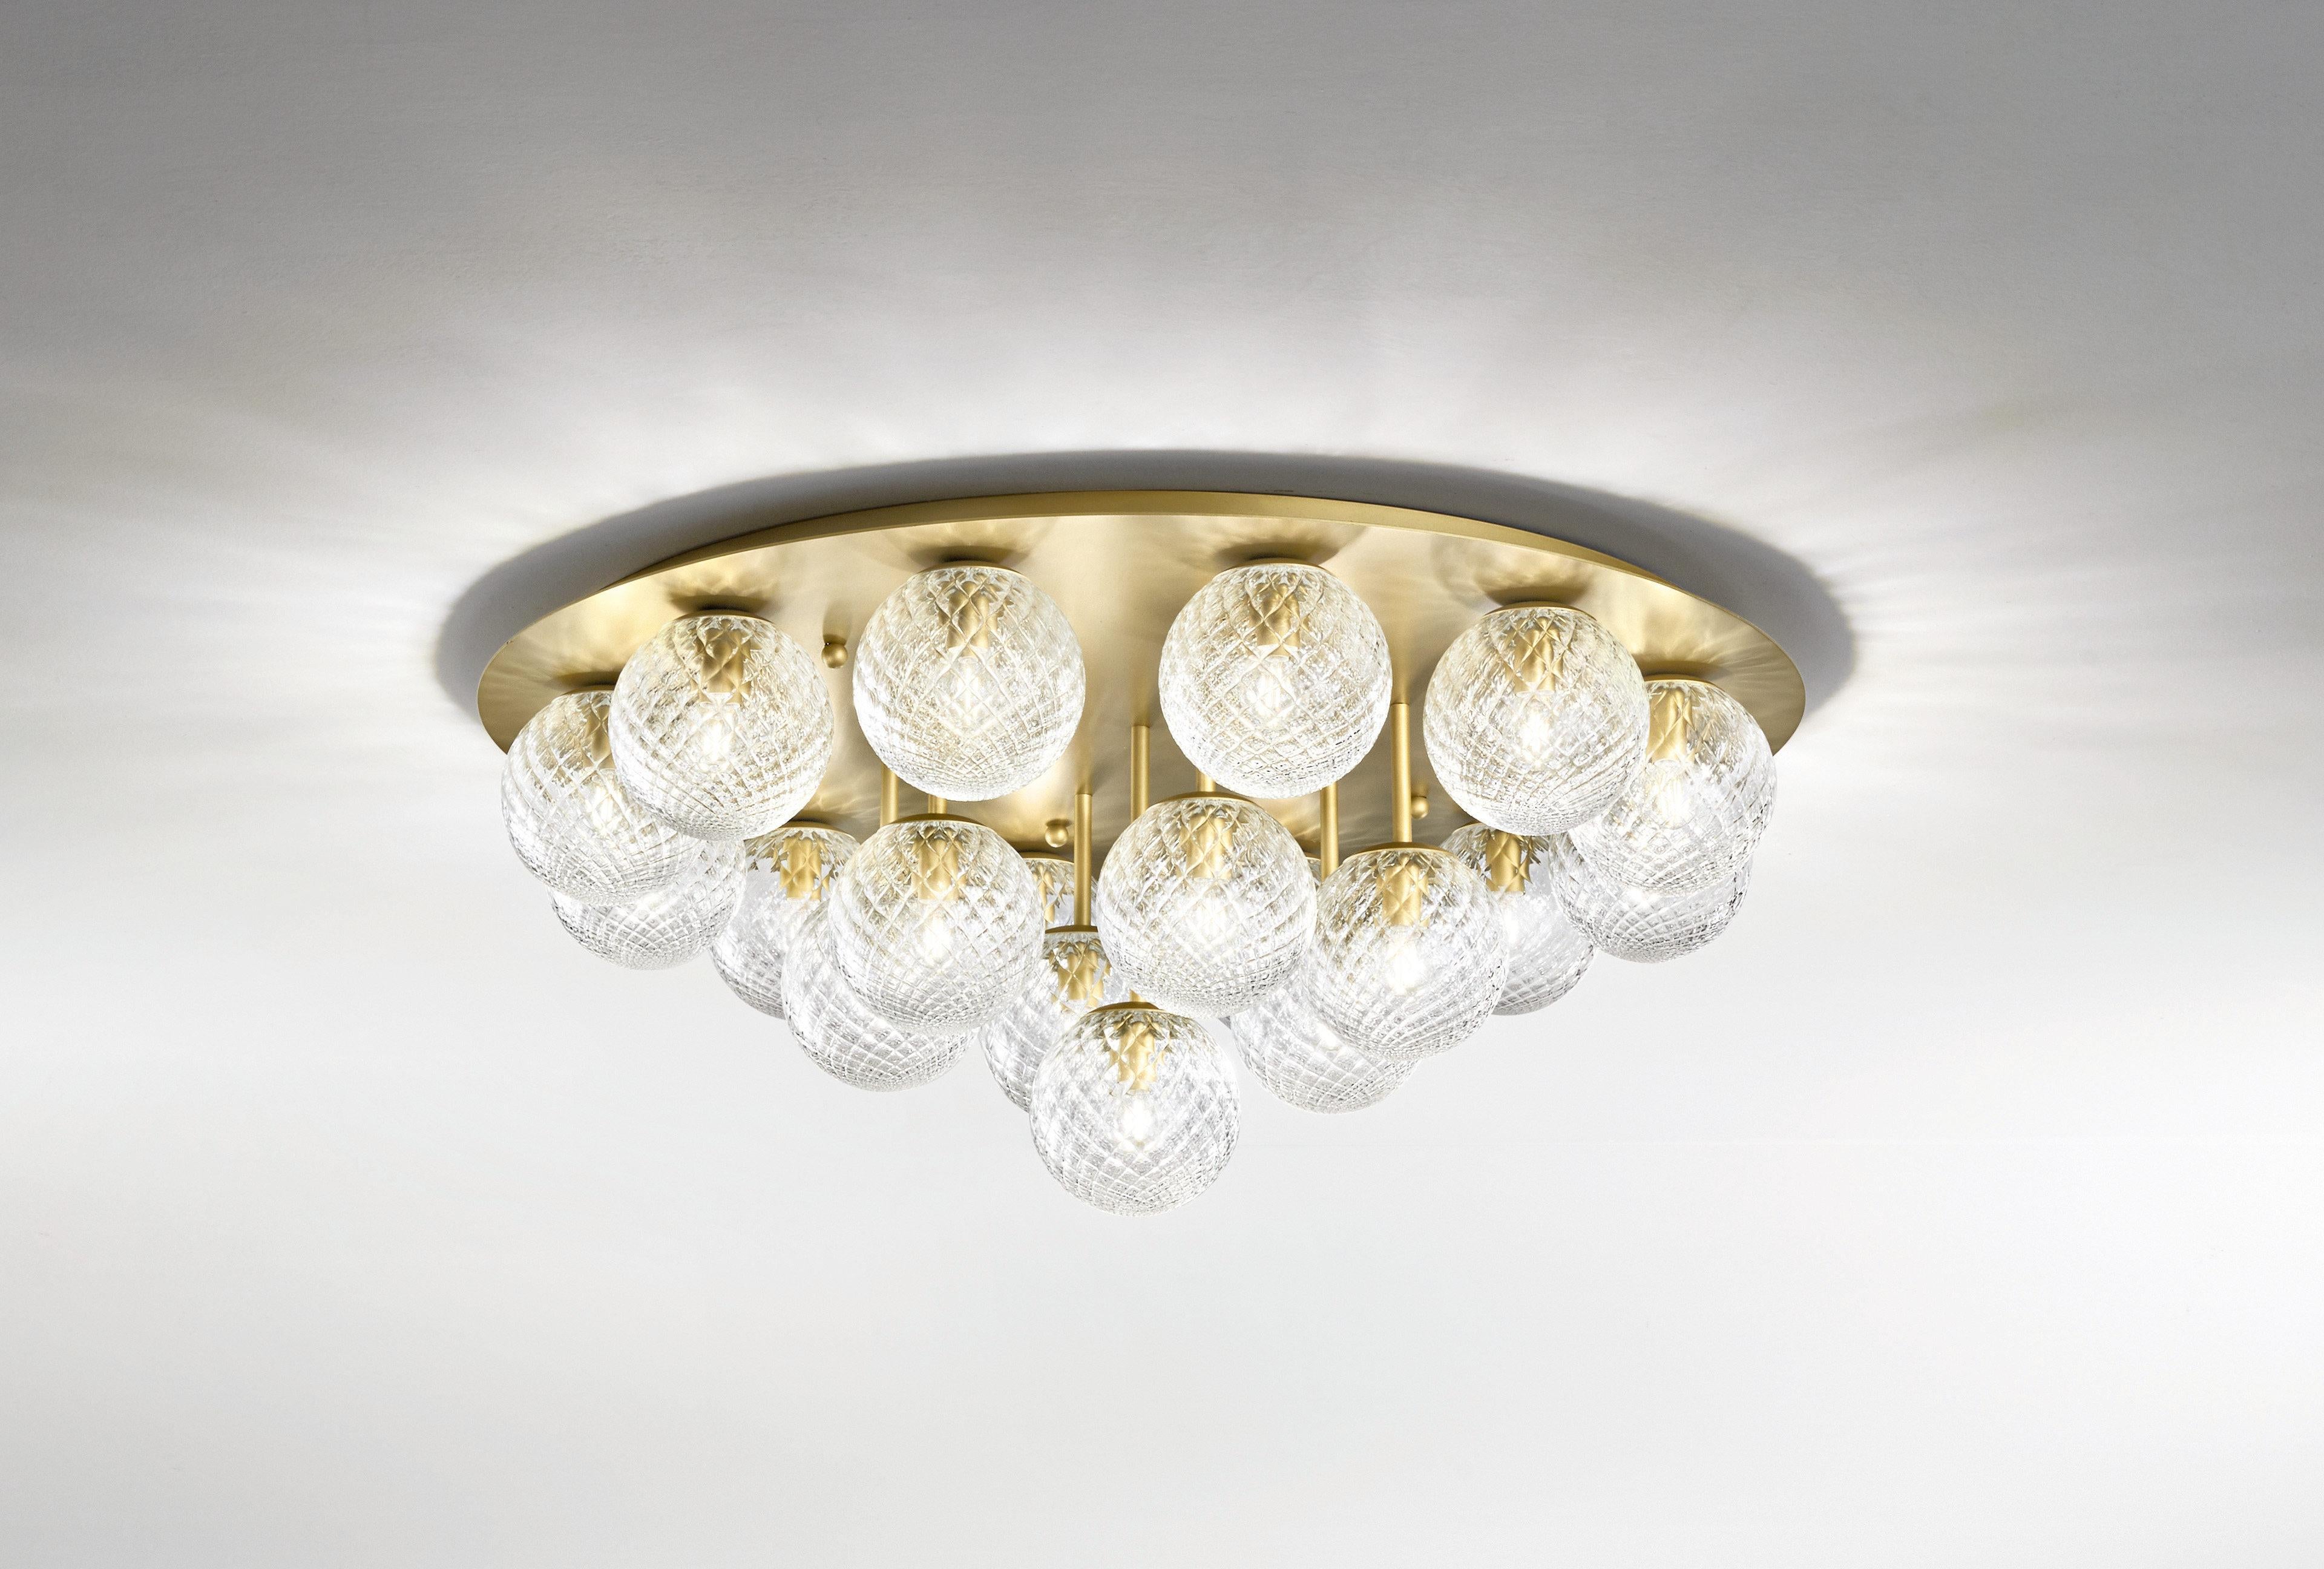 Italian modern flush mount with clear or smoky textured Murano glass globes, mounted on round ceiling plate in satin gold metal finish / Made in Italy by Fabio Ltd
19 lights / E12 or E14 type / max 40W each
Measures: diameter 37 inches, height 16